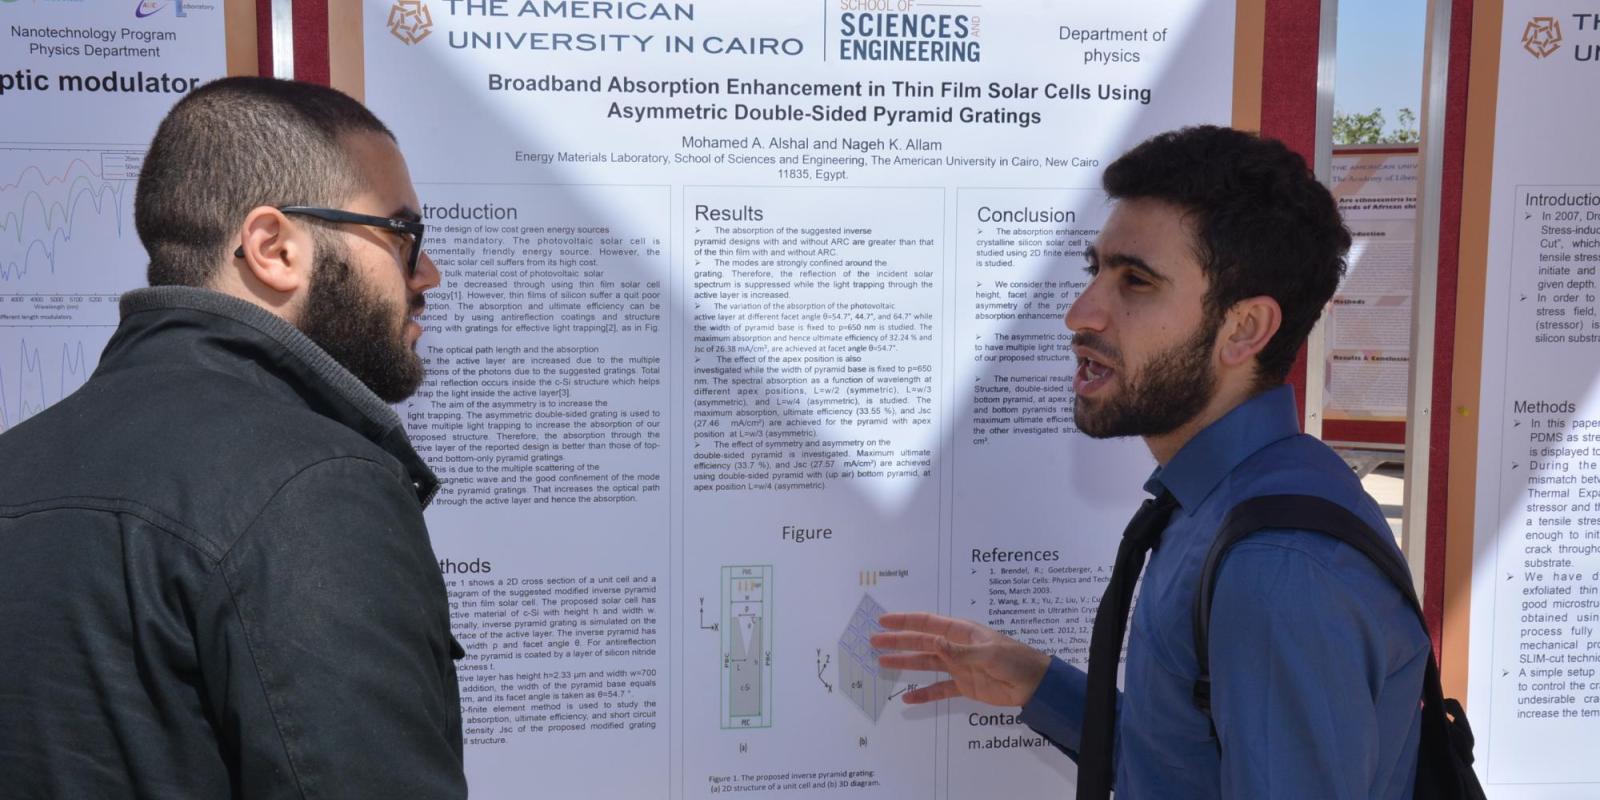 More than 100 students and faculty members presented their research at AUC Research Day